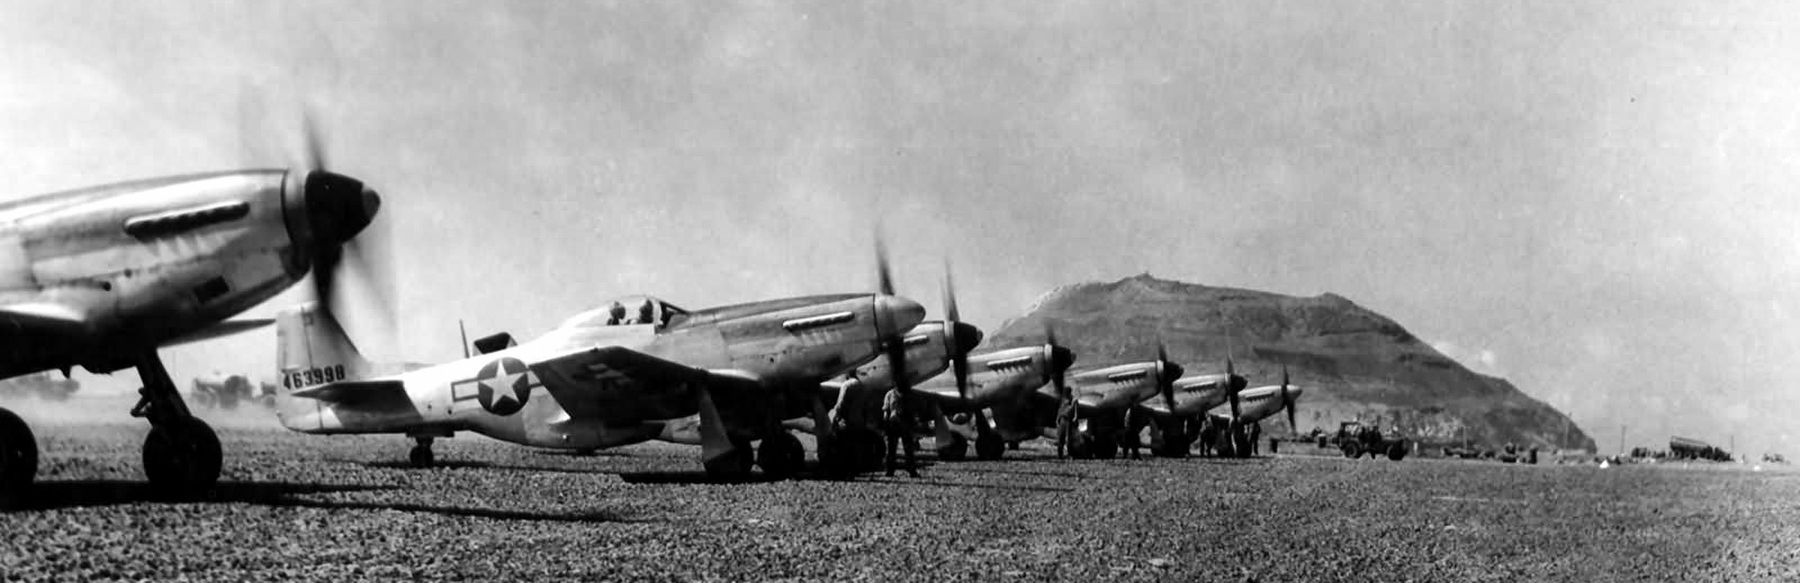 P-51D Mustangs of the 47th Fighter Squadron 15th FG Iwo Jima. image. Click for full size.